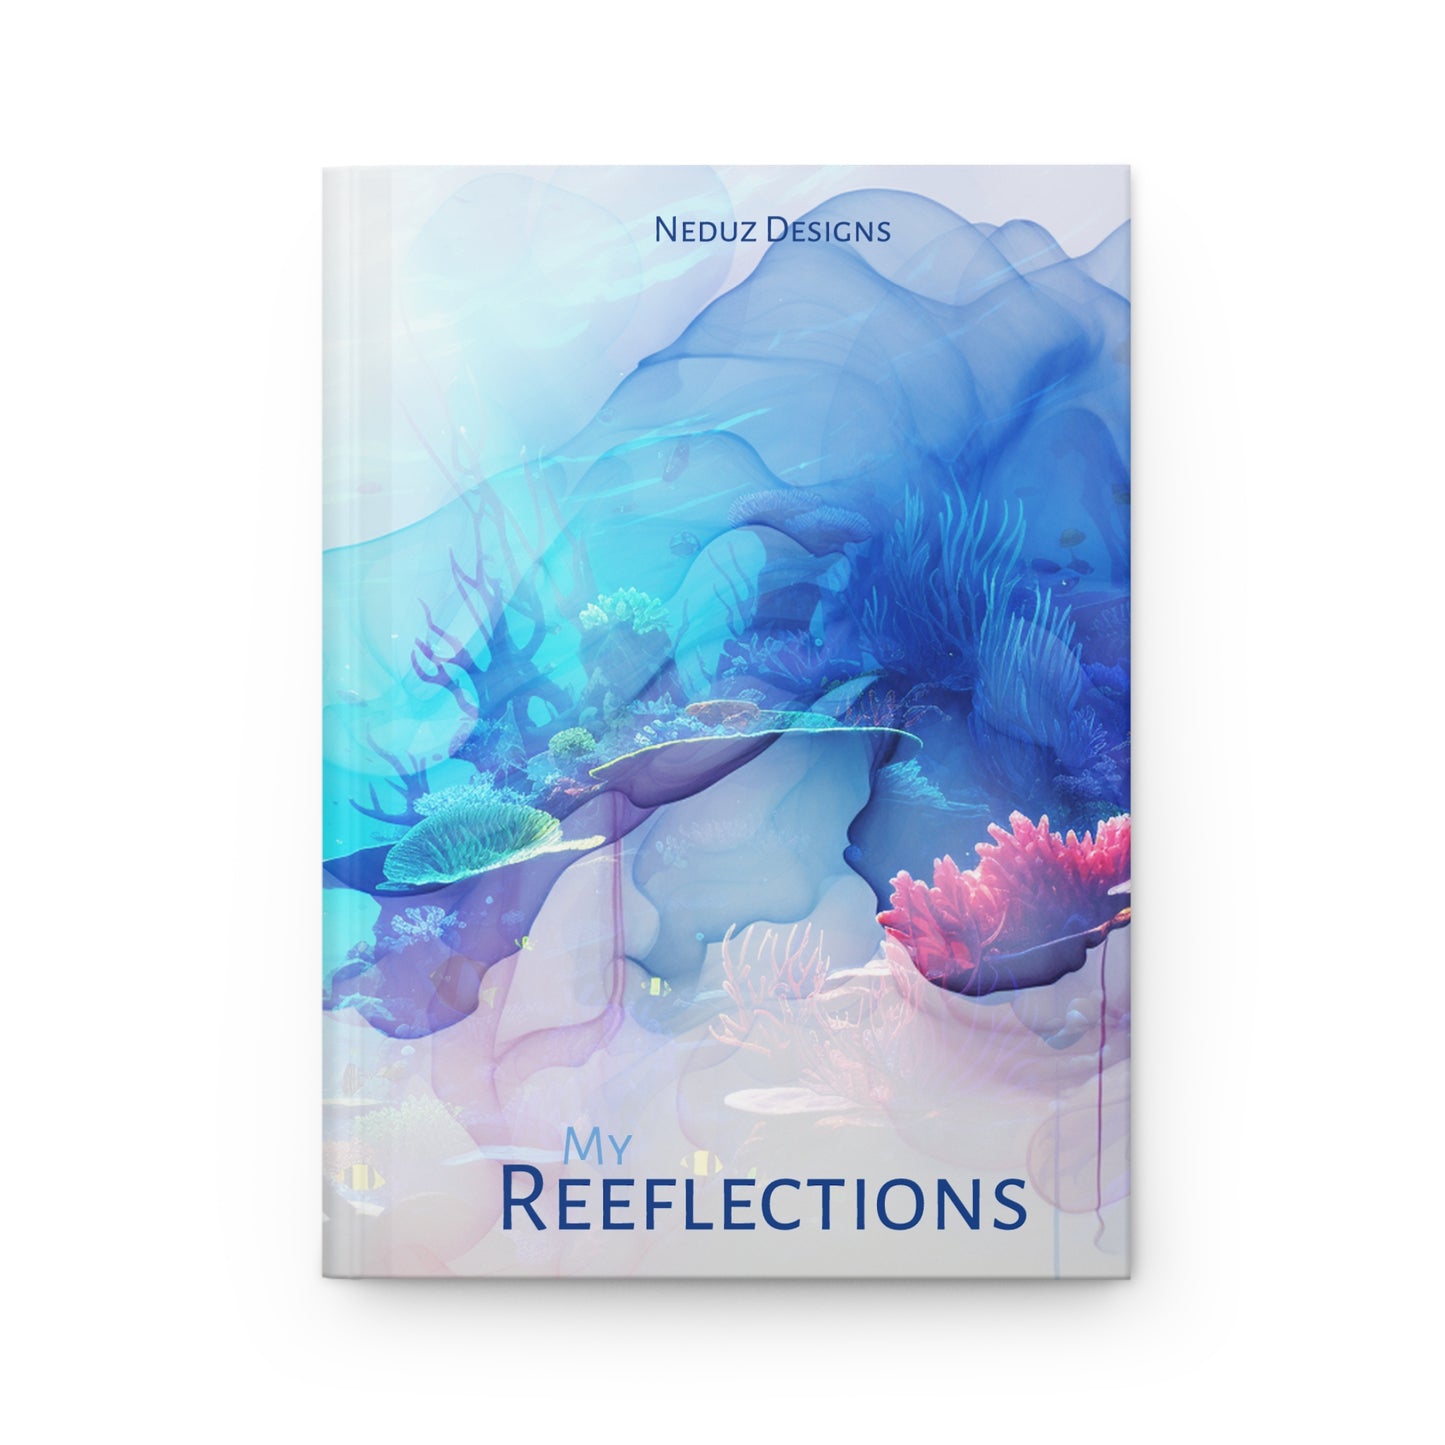 My Reeflections - Coral Reef Hardcover Journal, Dreamscape Collection by Neduz Designs, 5.75"x8"